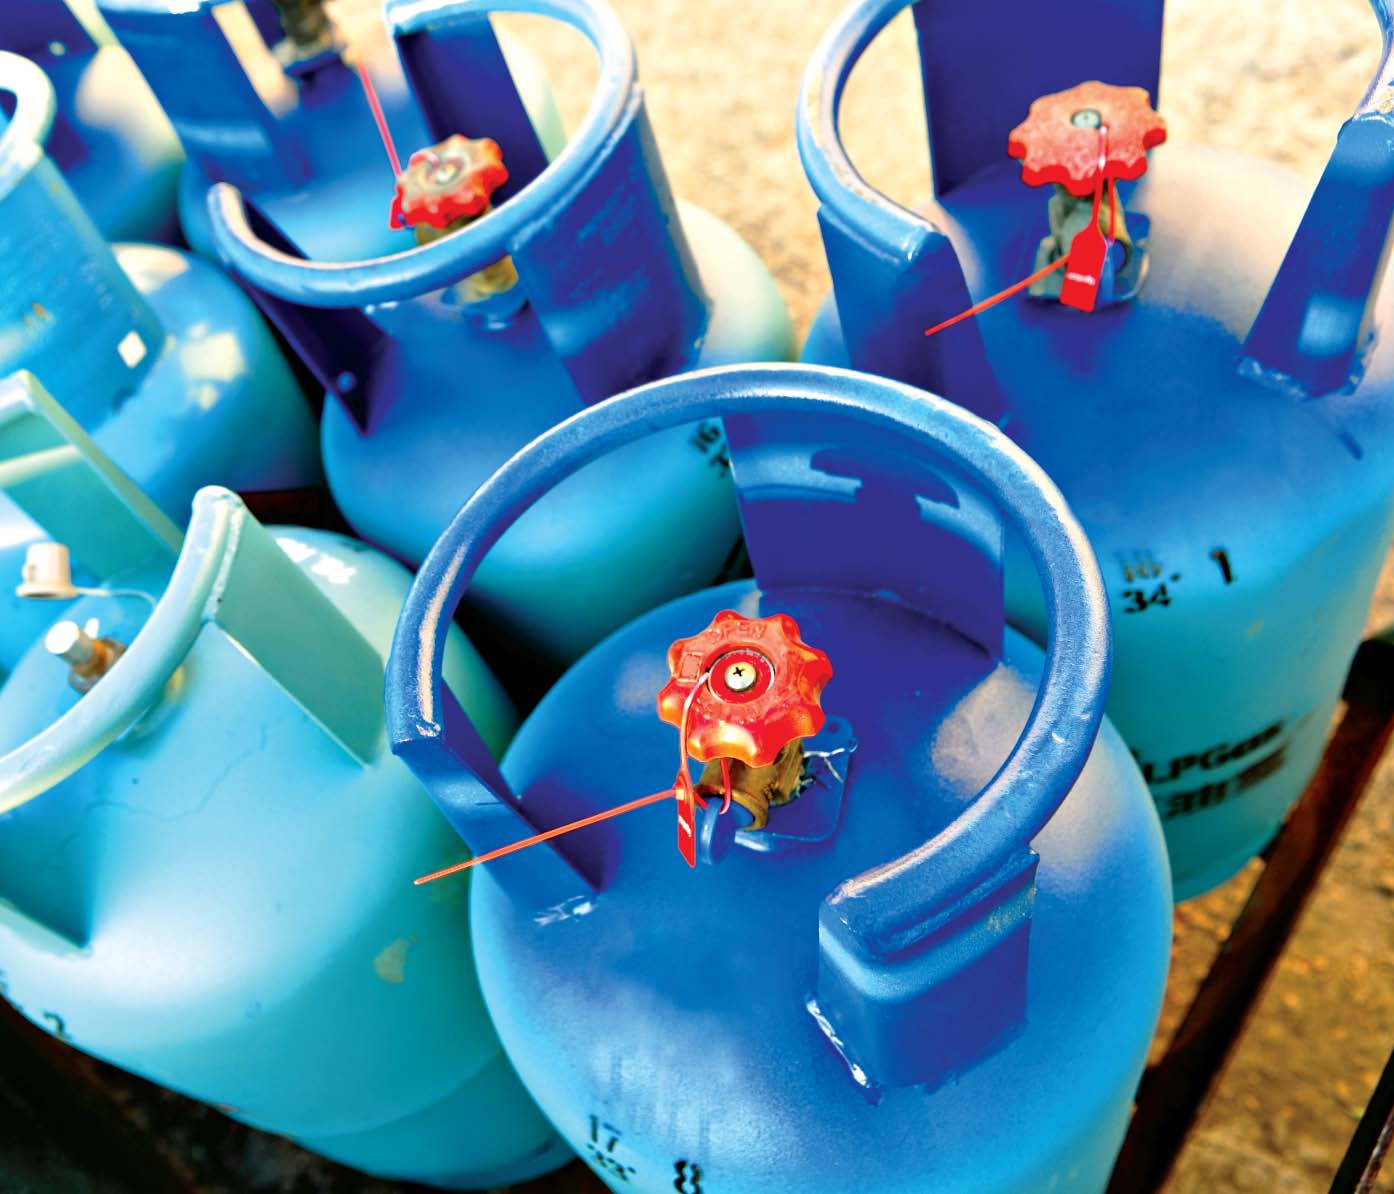 lpg stations could only be set up on roads or highways having minimum width of 60 feet stock image